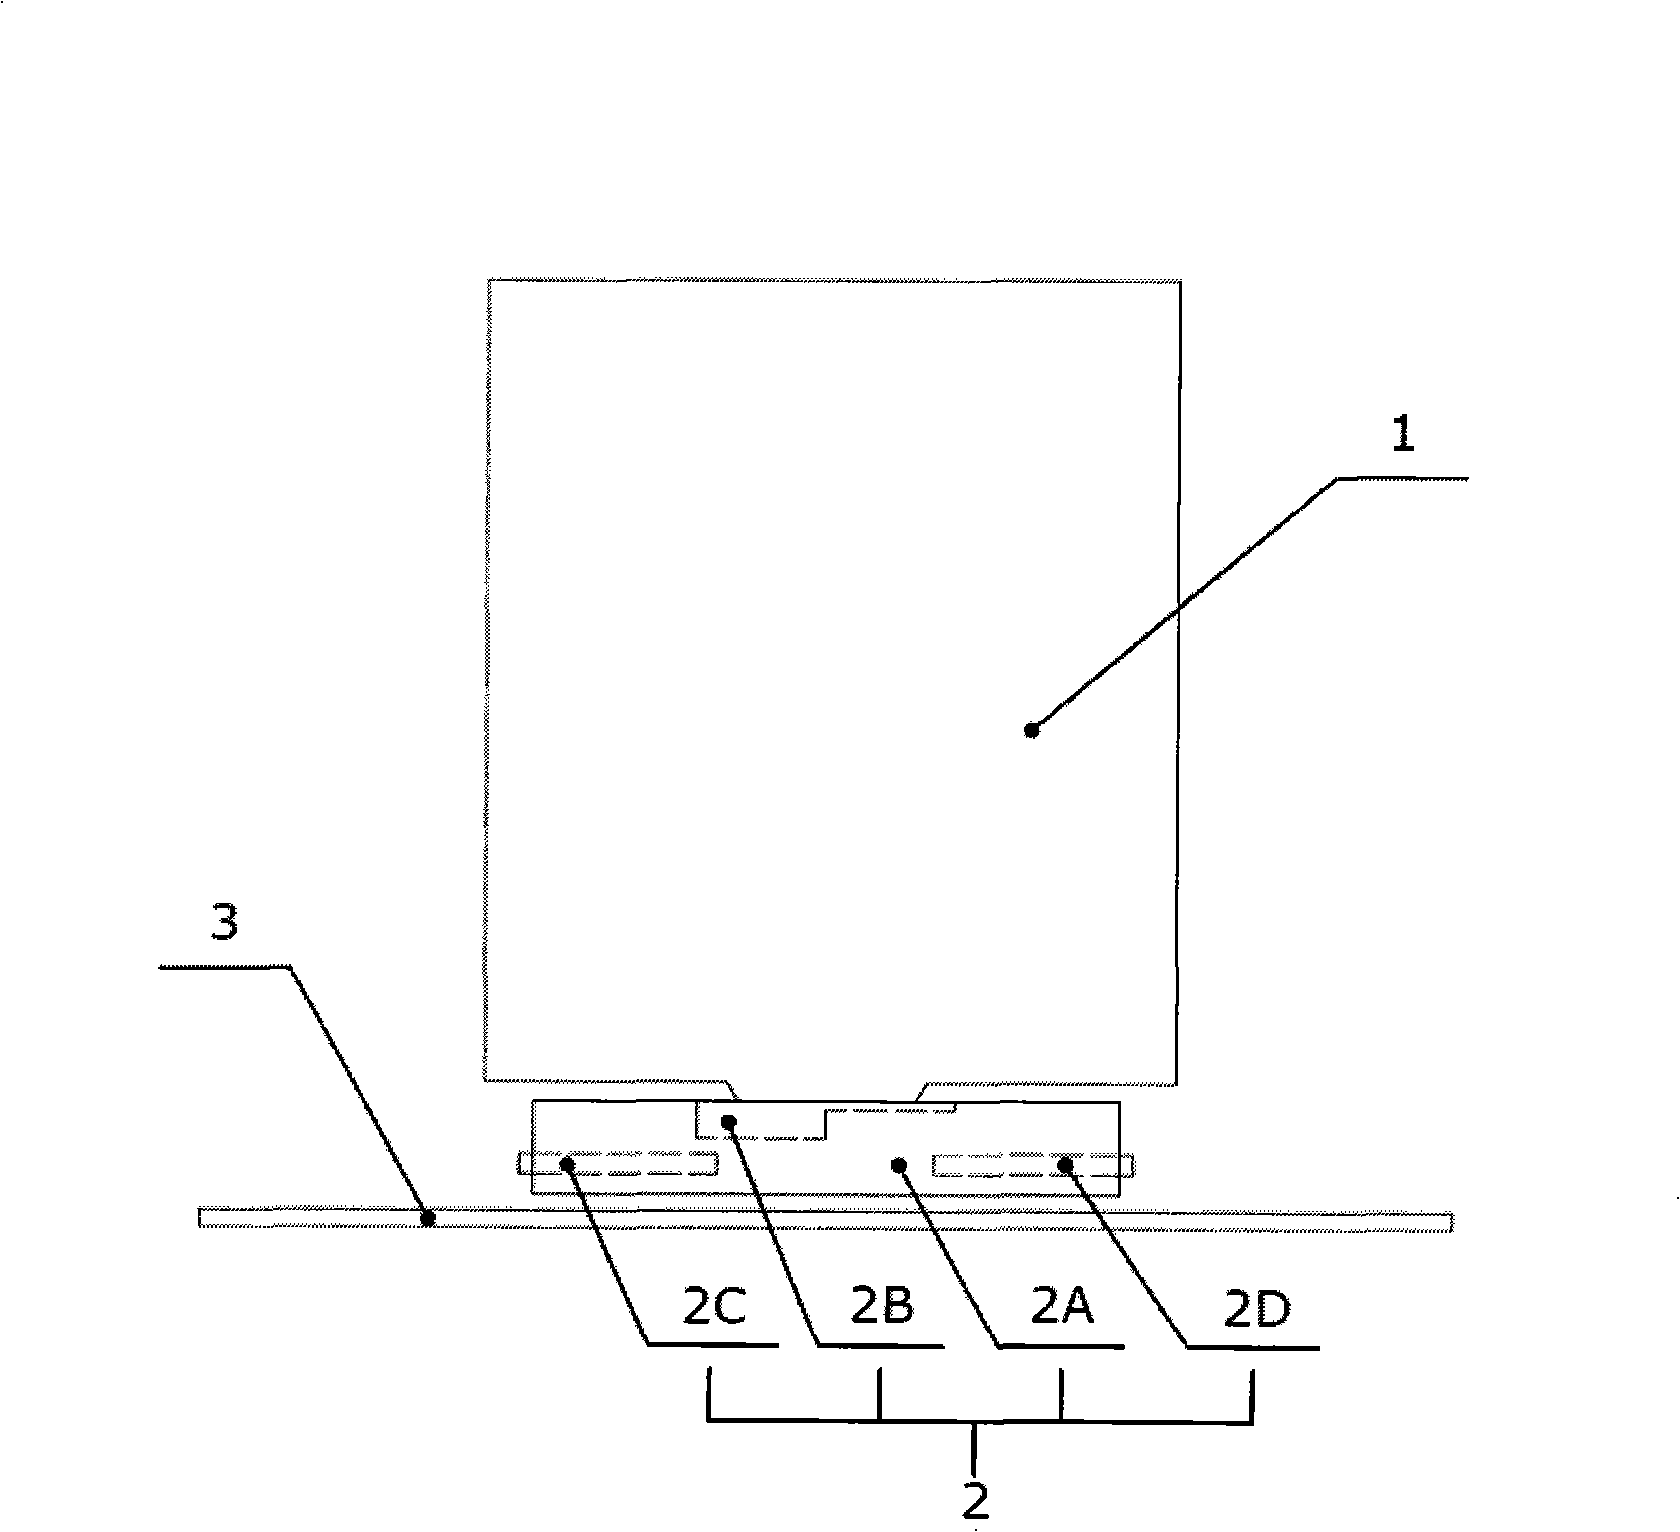 Device for controlling photo-etching machine immerge